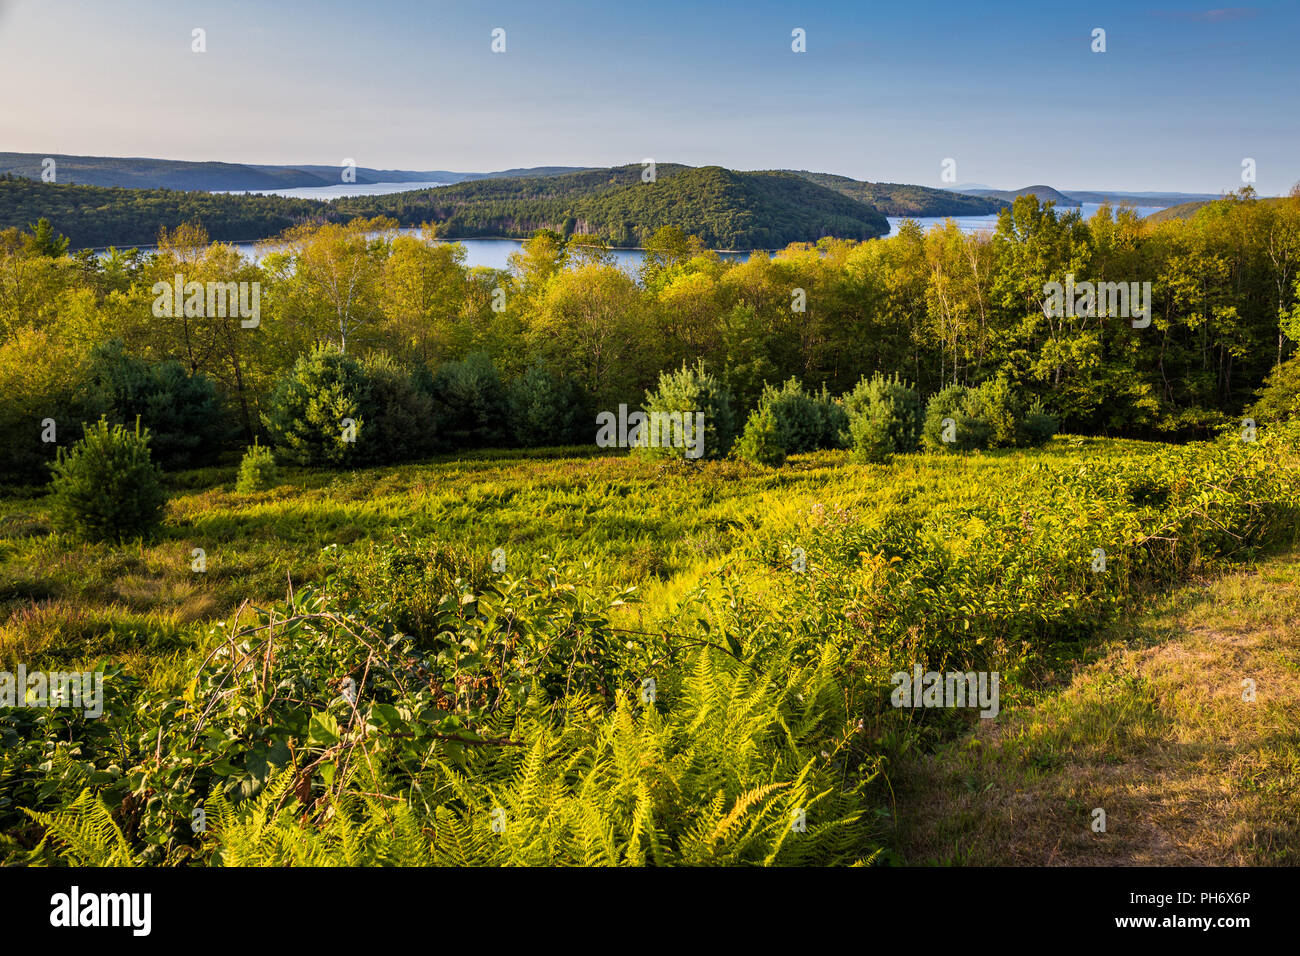 A view of the Quabbin Reservoir, Ware, Massachusetts from the Enfield Lookout Stock Photo